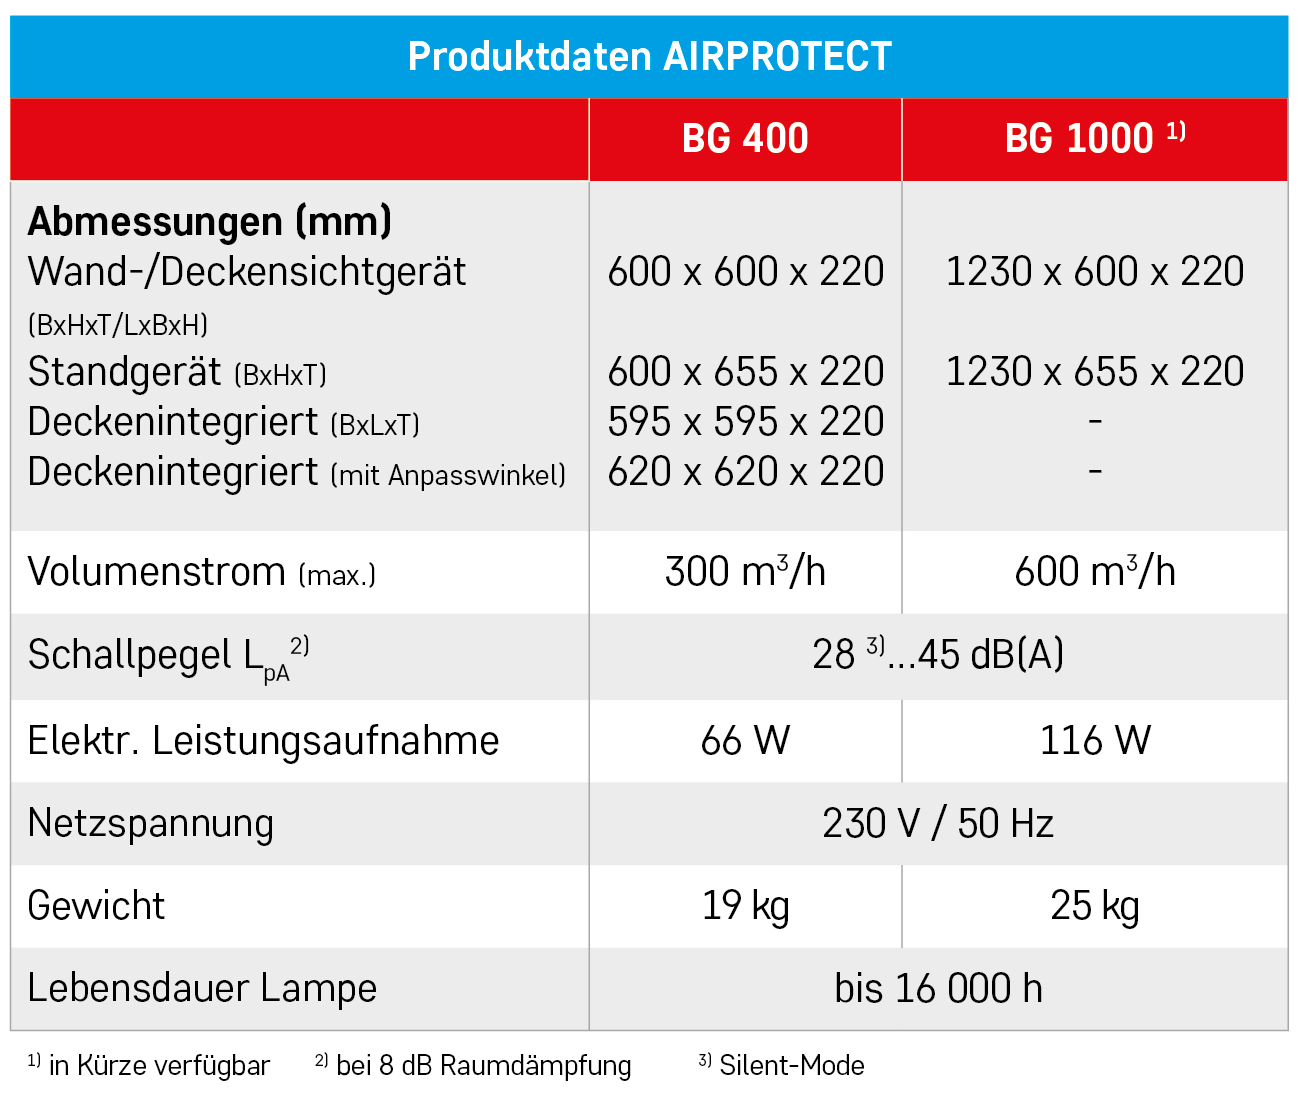 Tabelle_Produktdaten_Airprotect